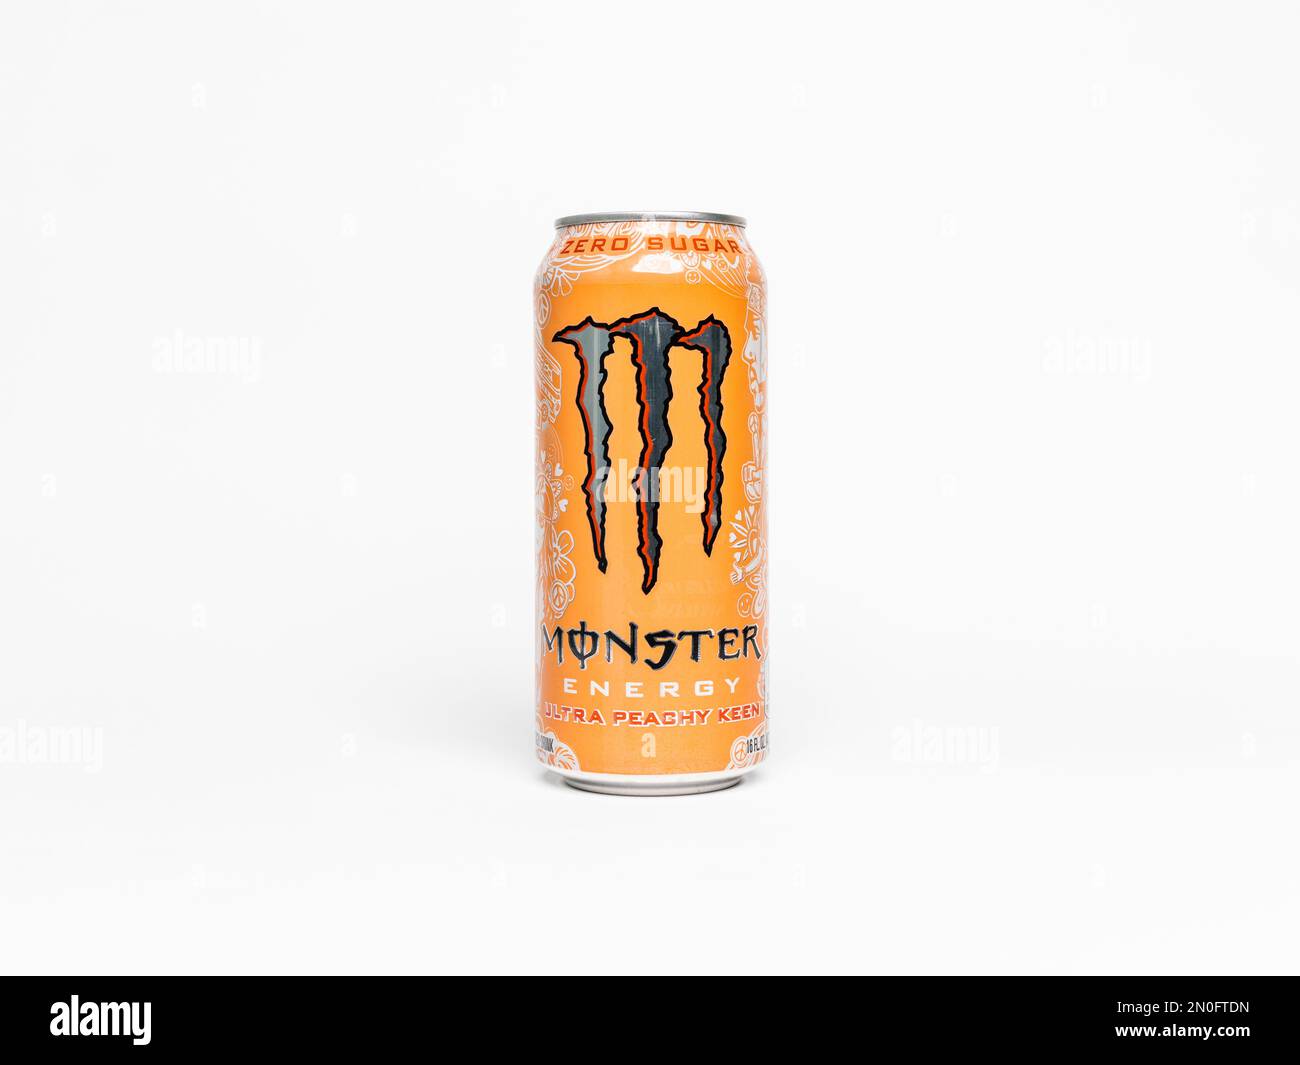 Monster Energy Ultra Peachy Keen beverage. Sugar free Monster energy drink can in a studio environment. Ice cold refreshment with caffeine. Stock Photo